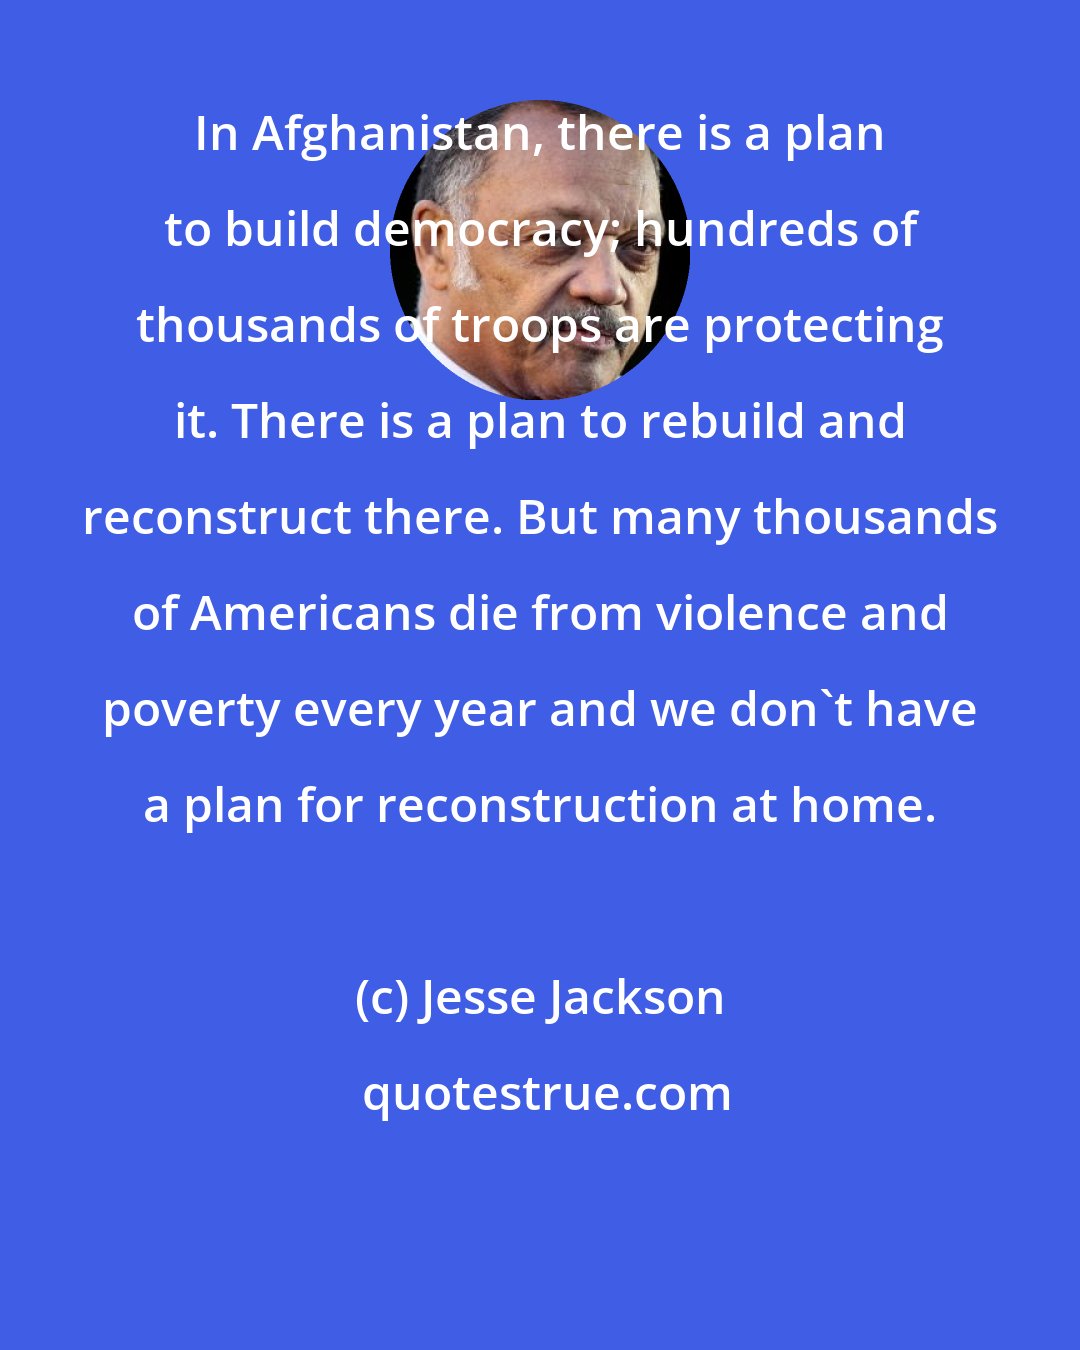 Jesse Jackson: In Afghanistan, there is a plan to build democracy; hundreds of thousands of troops are protecting it. There is a plan to rebuild and reconstruct there. But many thousands of Americans die from violence and poverty every year and we don't have a plan for reconstruction at home.